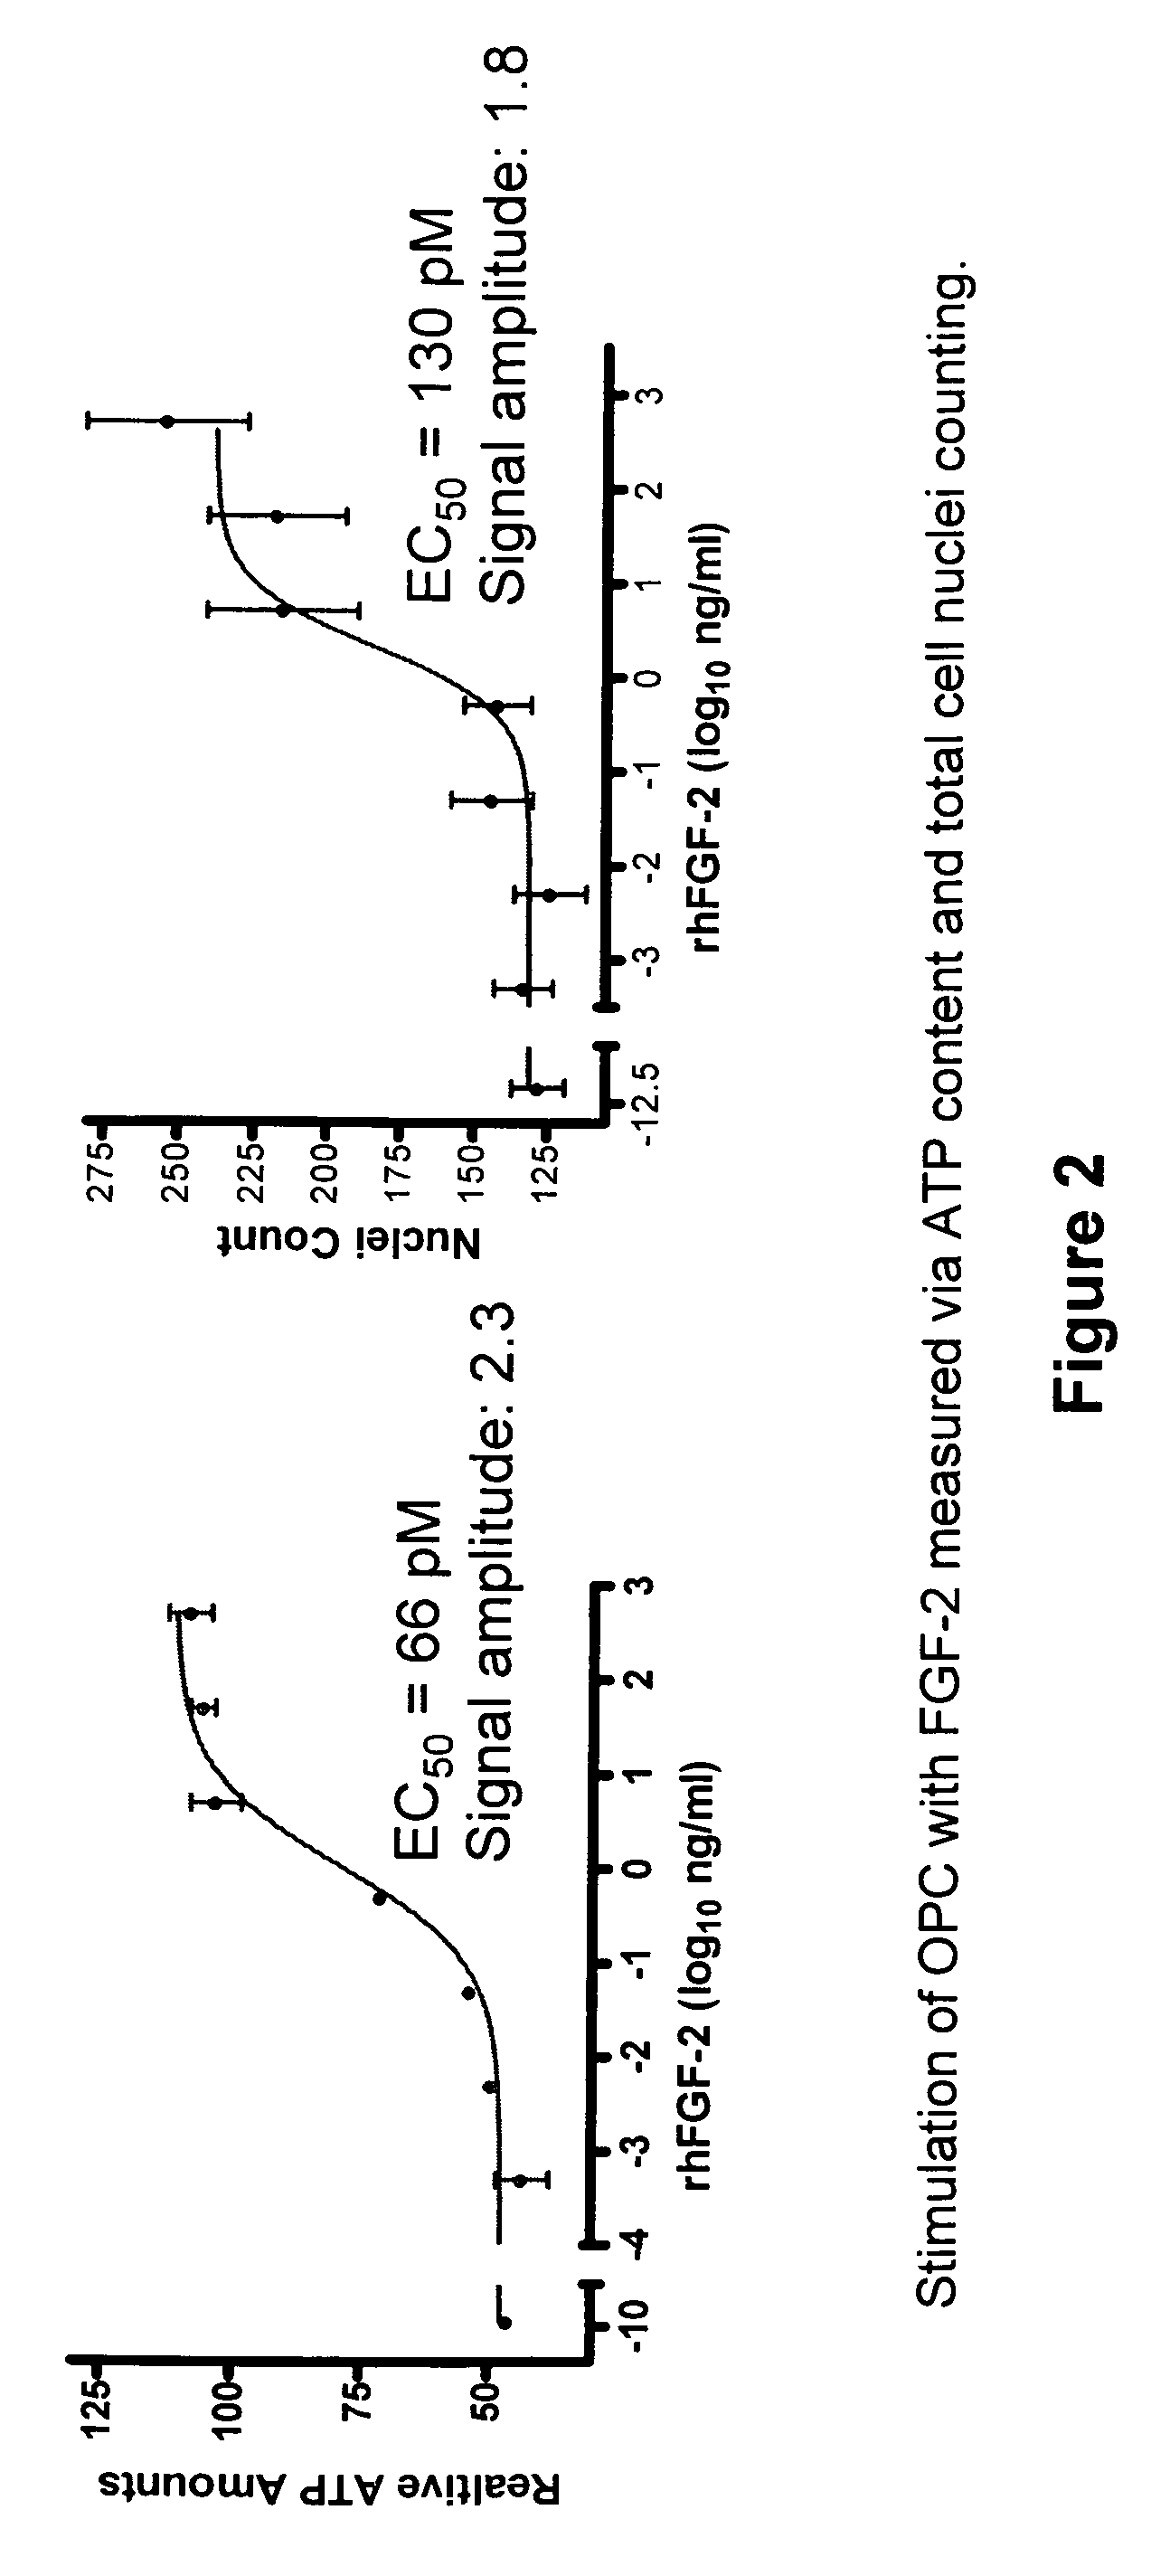 Compositions and Methods for Treating Diseases, Disorders, or Conditions Characterized by Myelin Degeneration, Myelin Deficiency or Loss